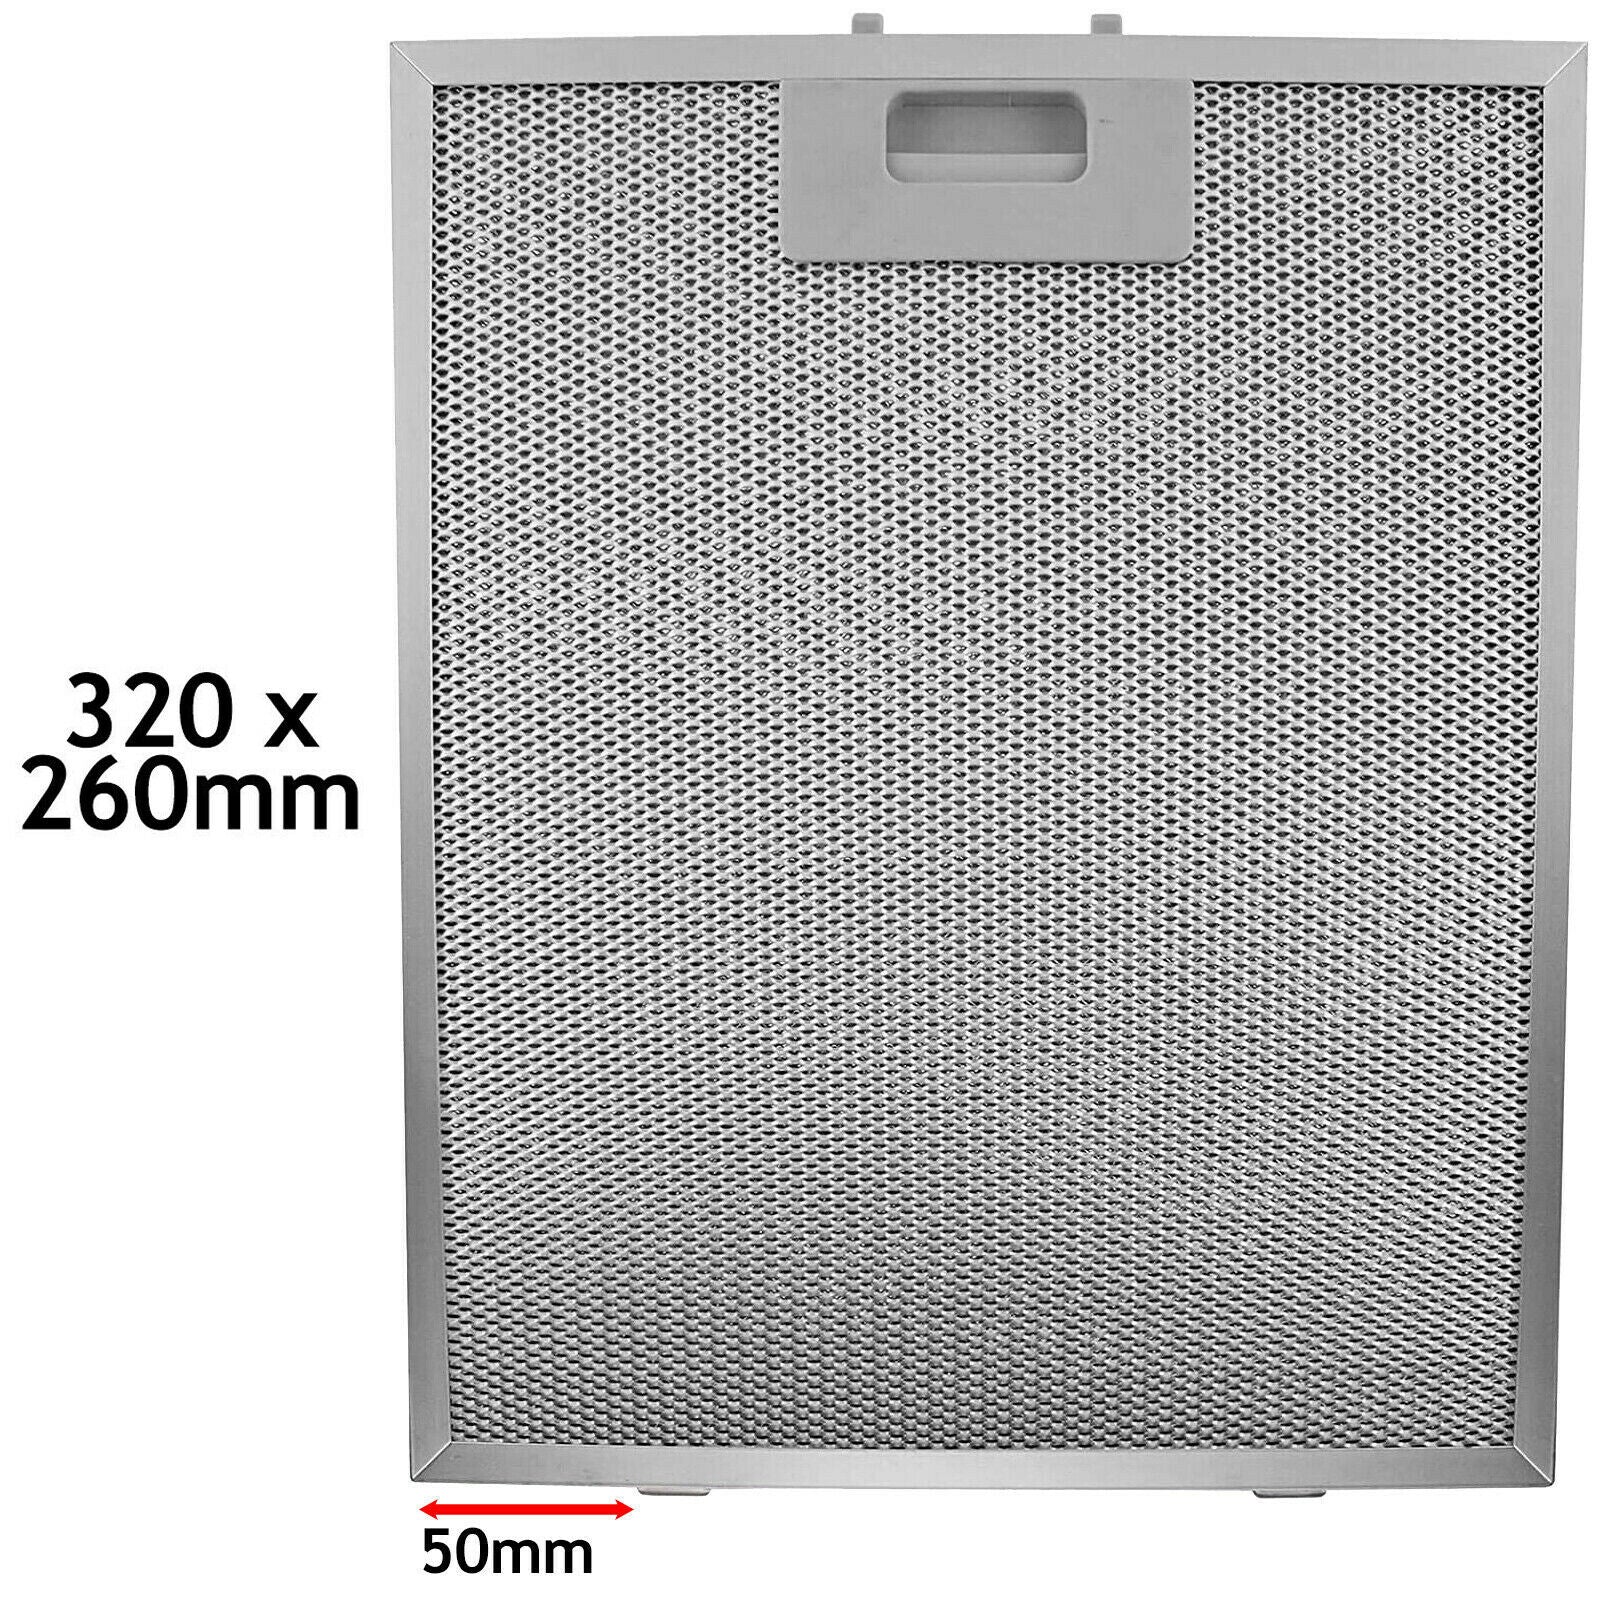 Metal Grease filter For AEG BAUMATIC Cooker Hood Extractor Vent Fan 320 x 260mm